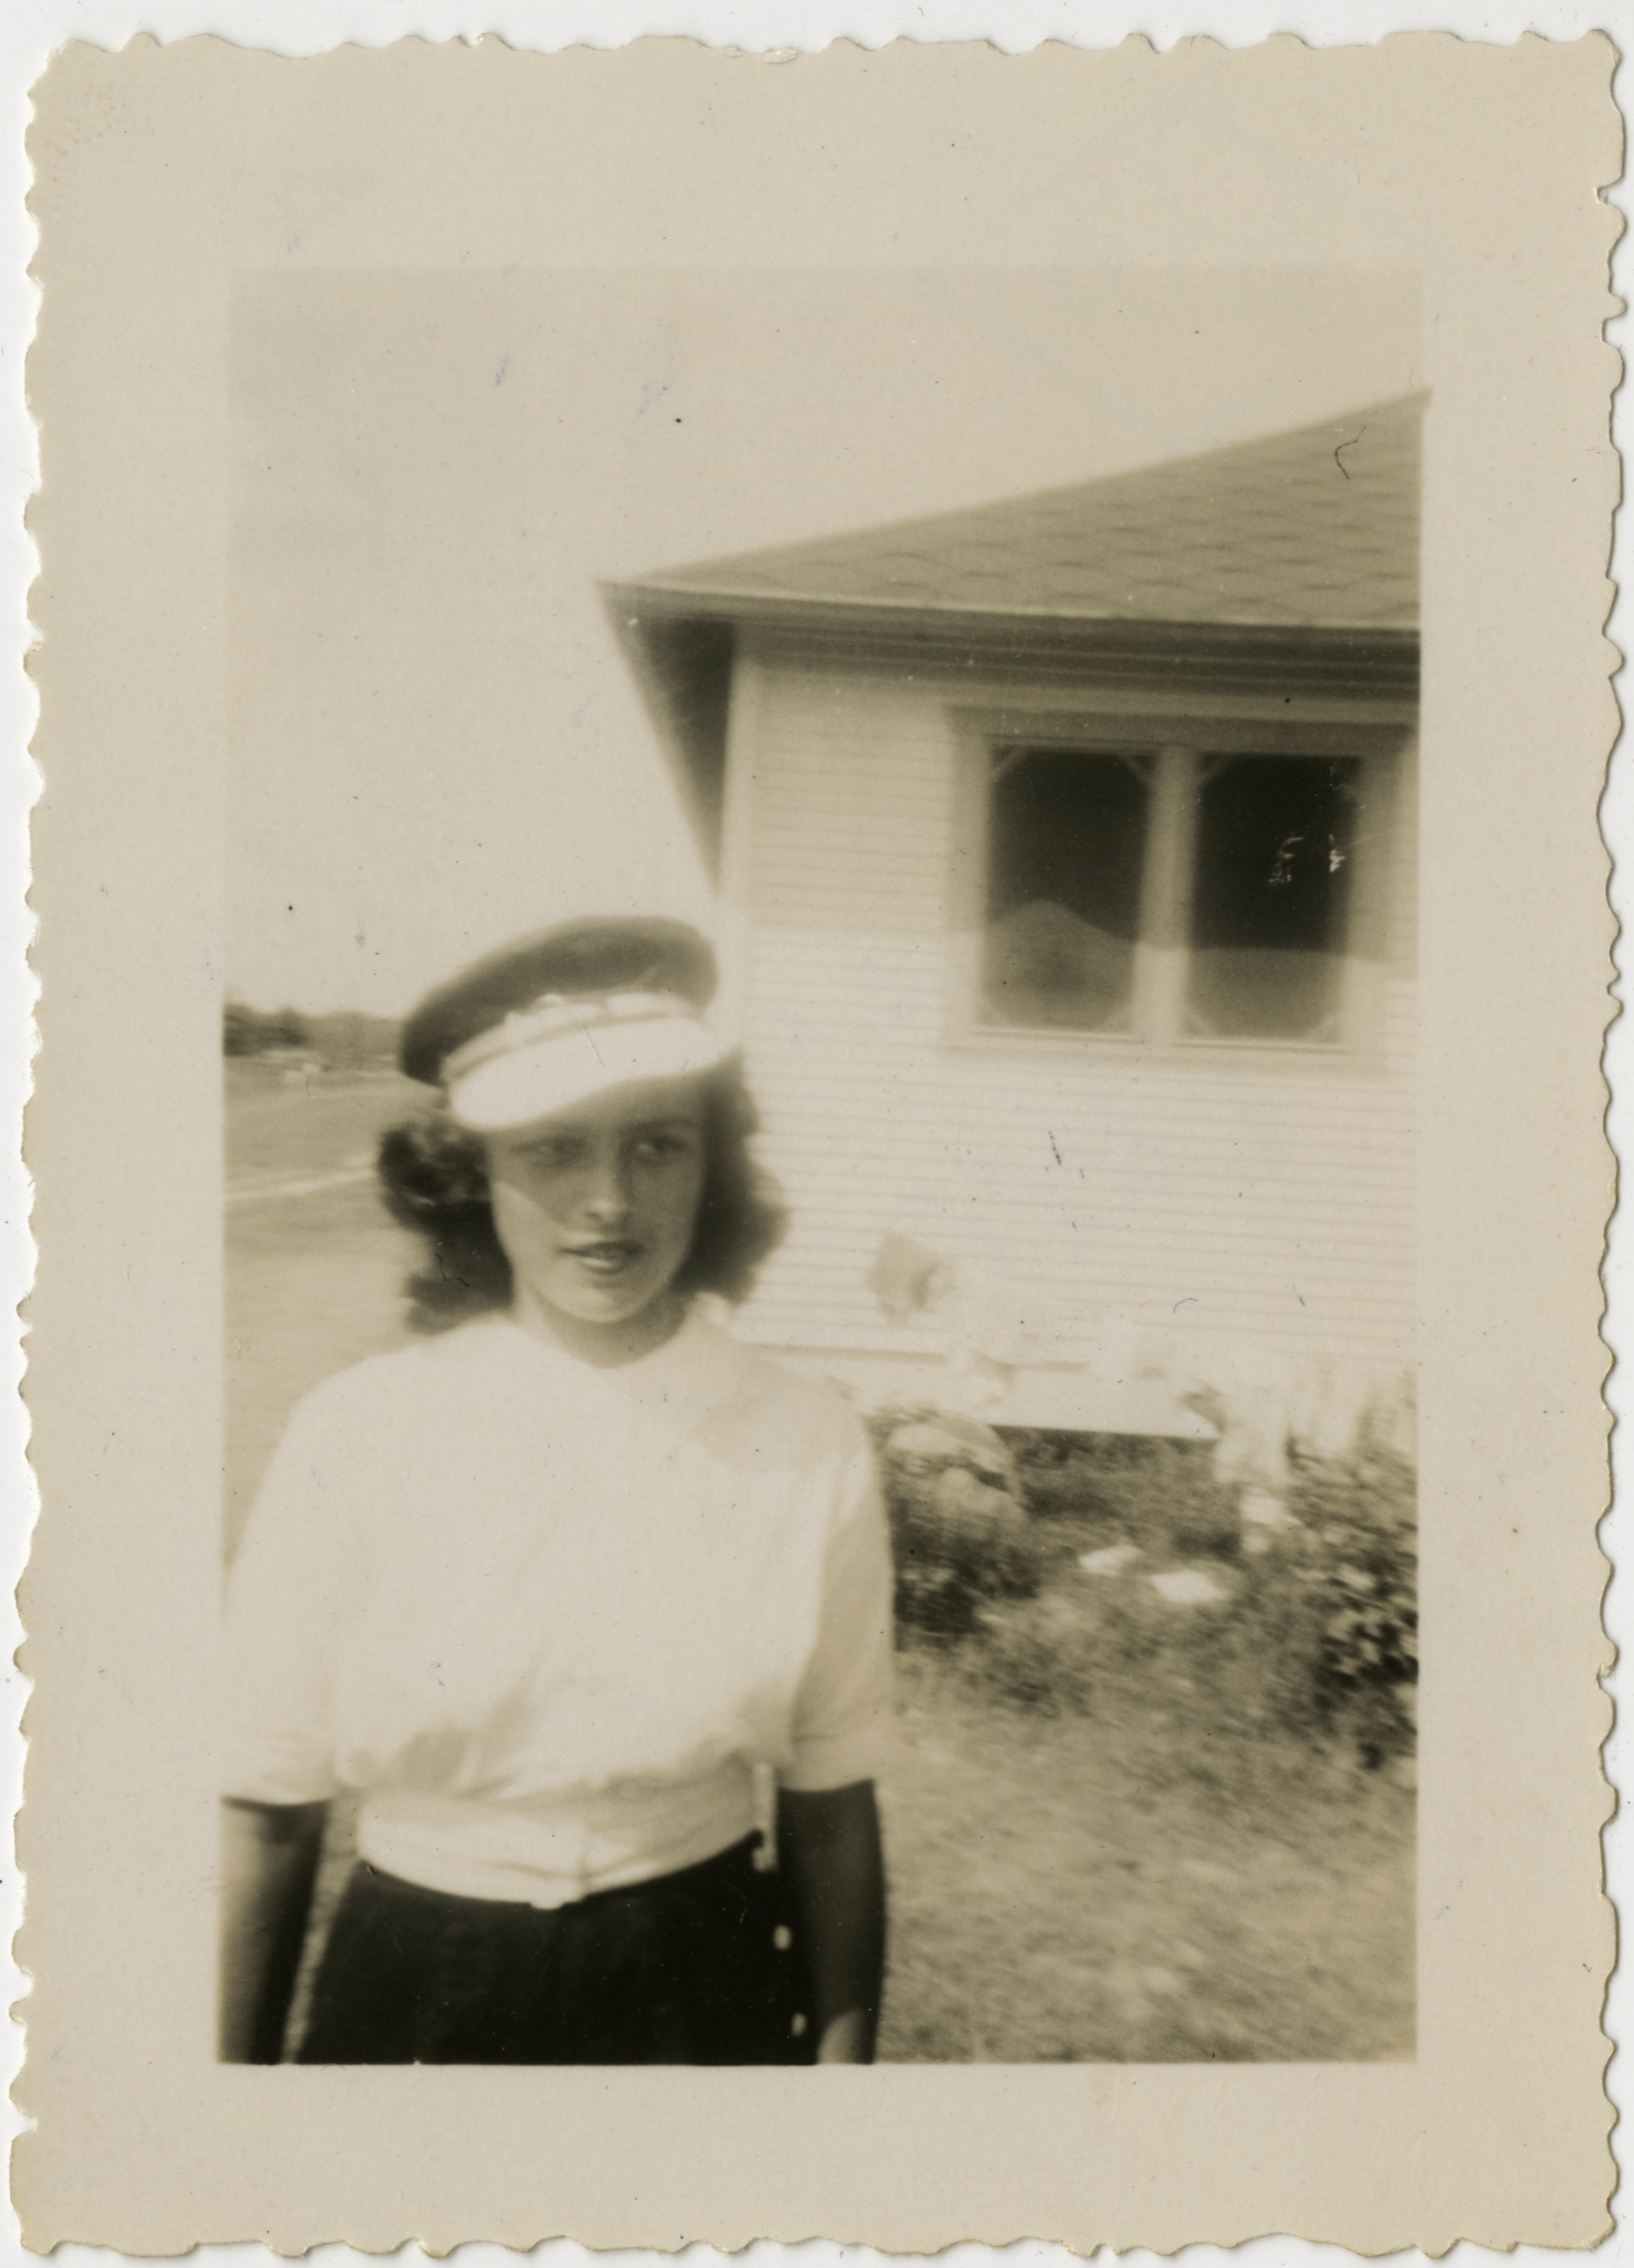 Marcia Dillick, 1941. Ontario Jewish Archives, Blankenstein Family Heritage Centre, accession 2018-6-19.